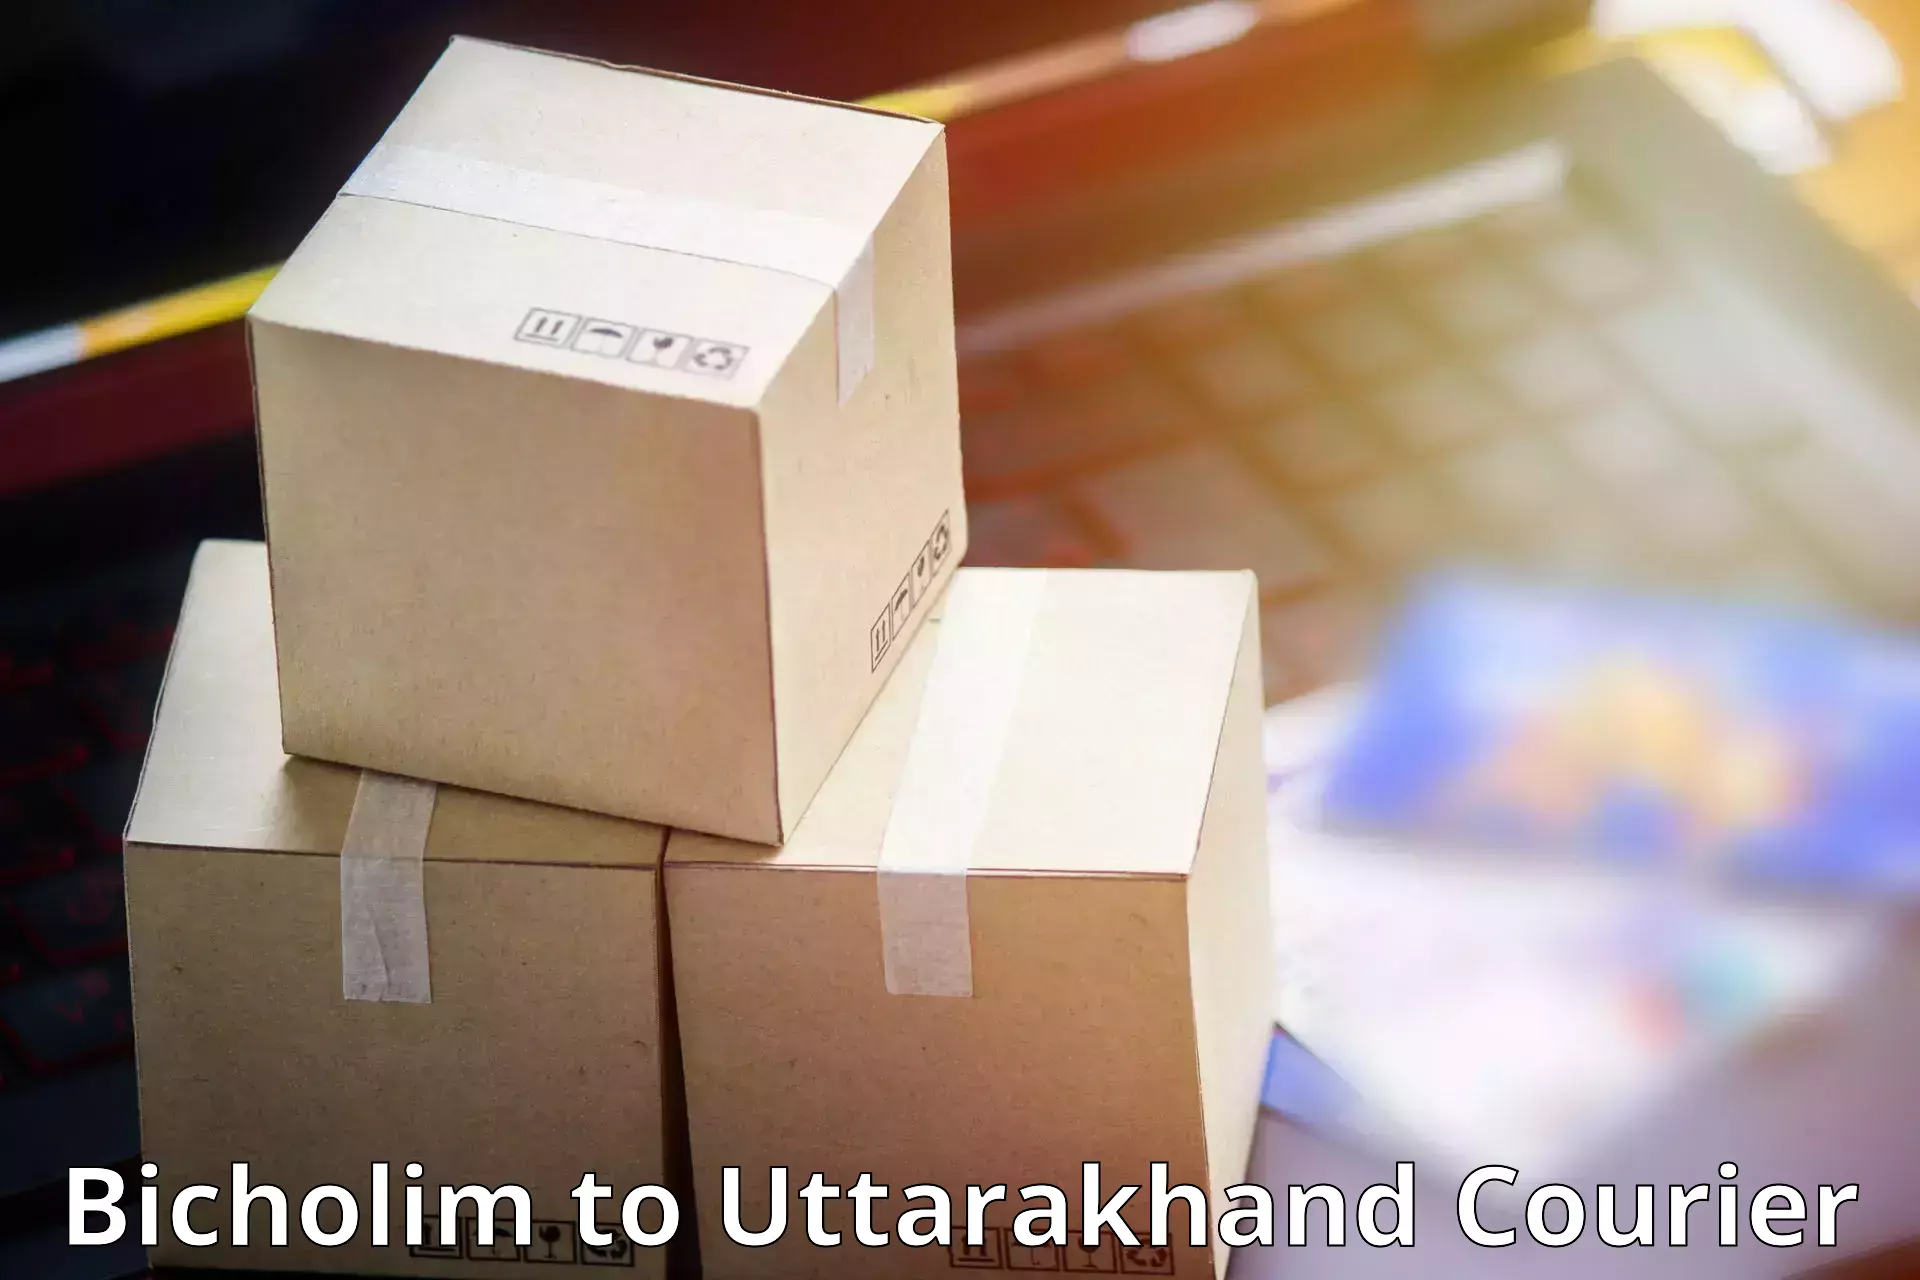 Specialized shipment handling Bicholim to Mussoorie